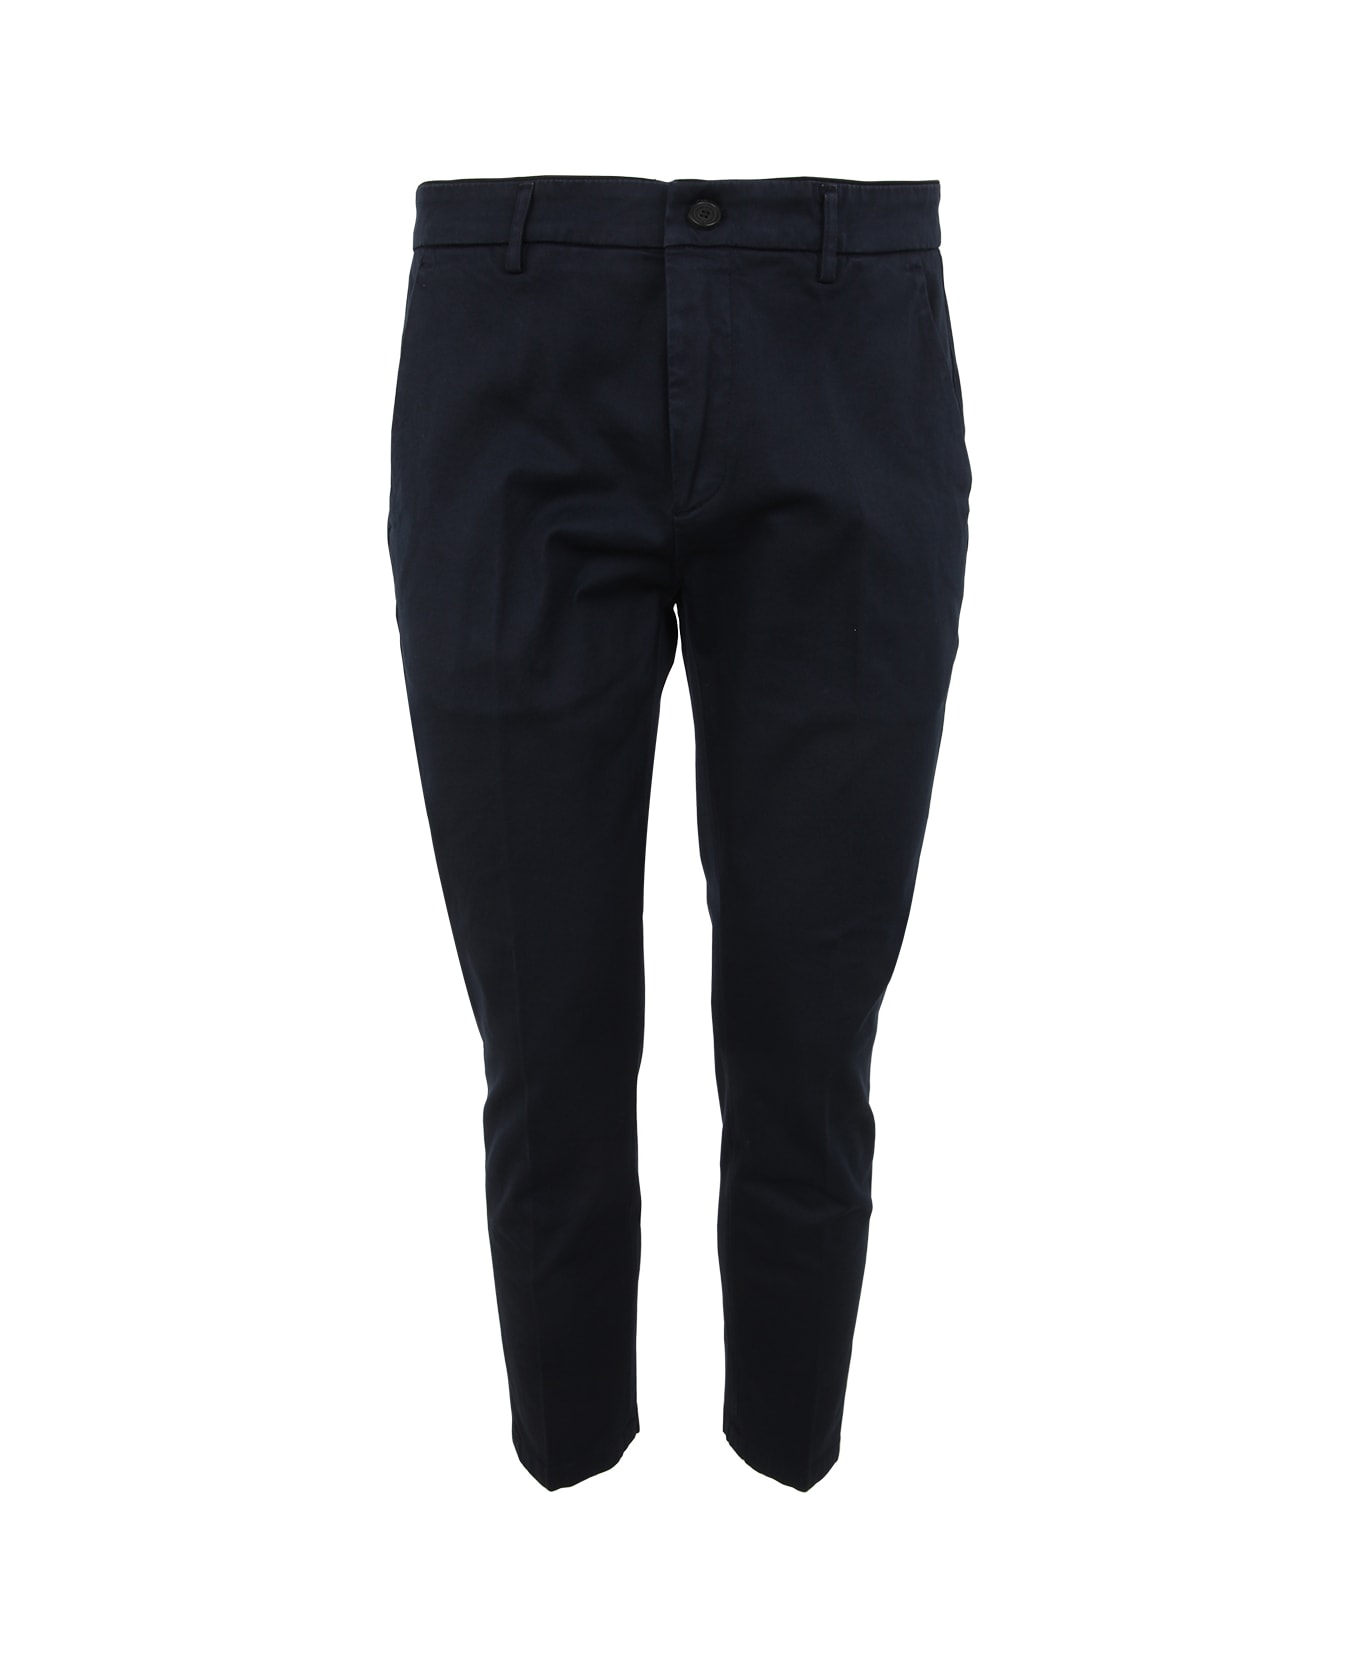 Department Five Prince Chinos Crop Trousers - Navy ボトムス